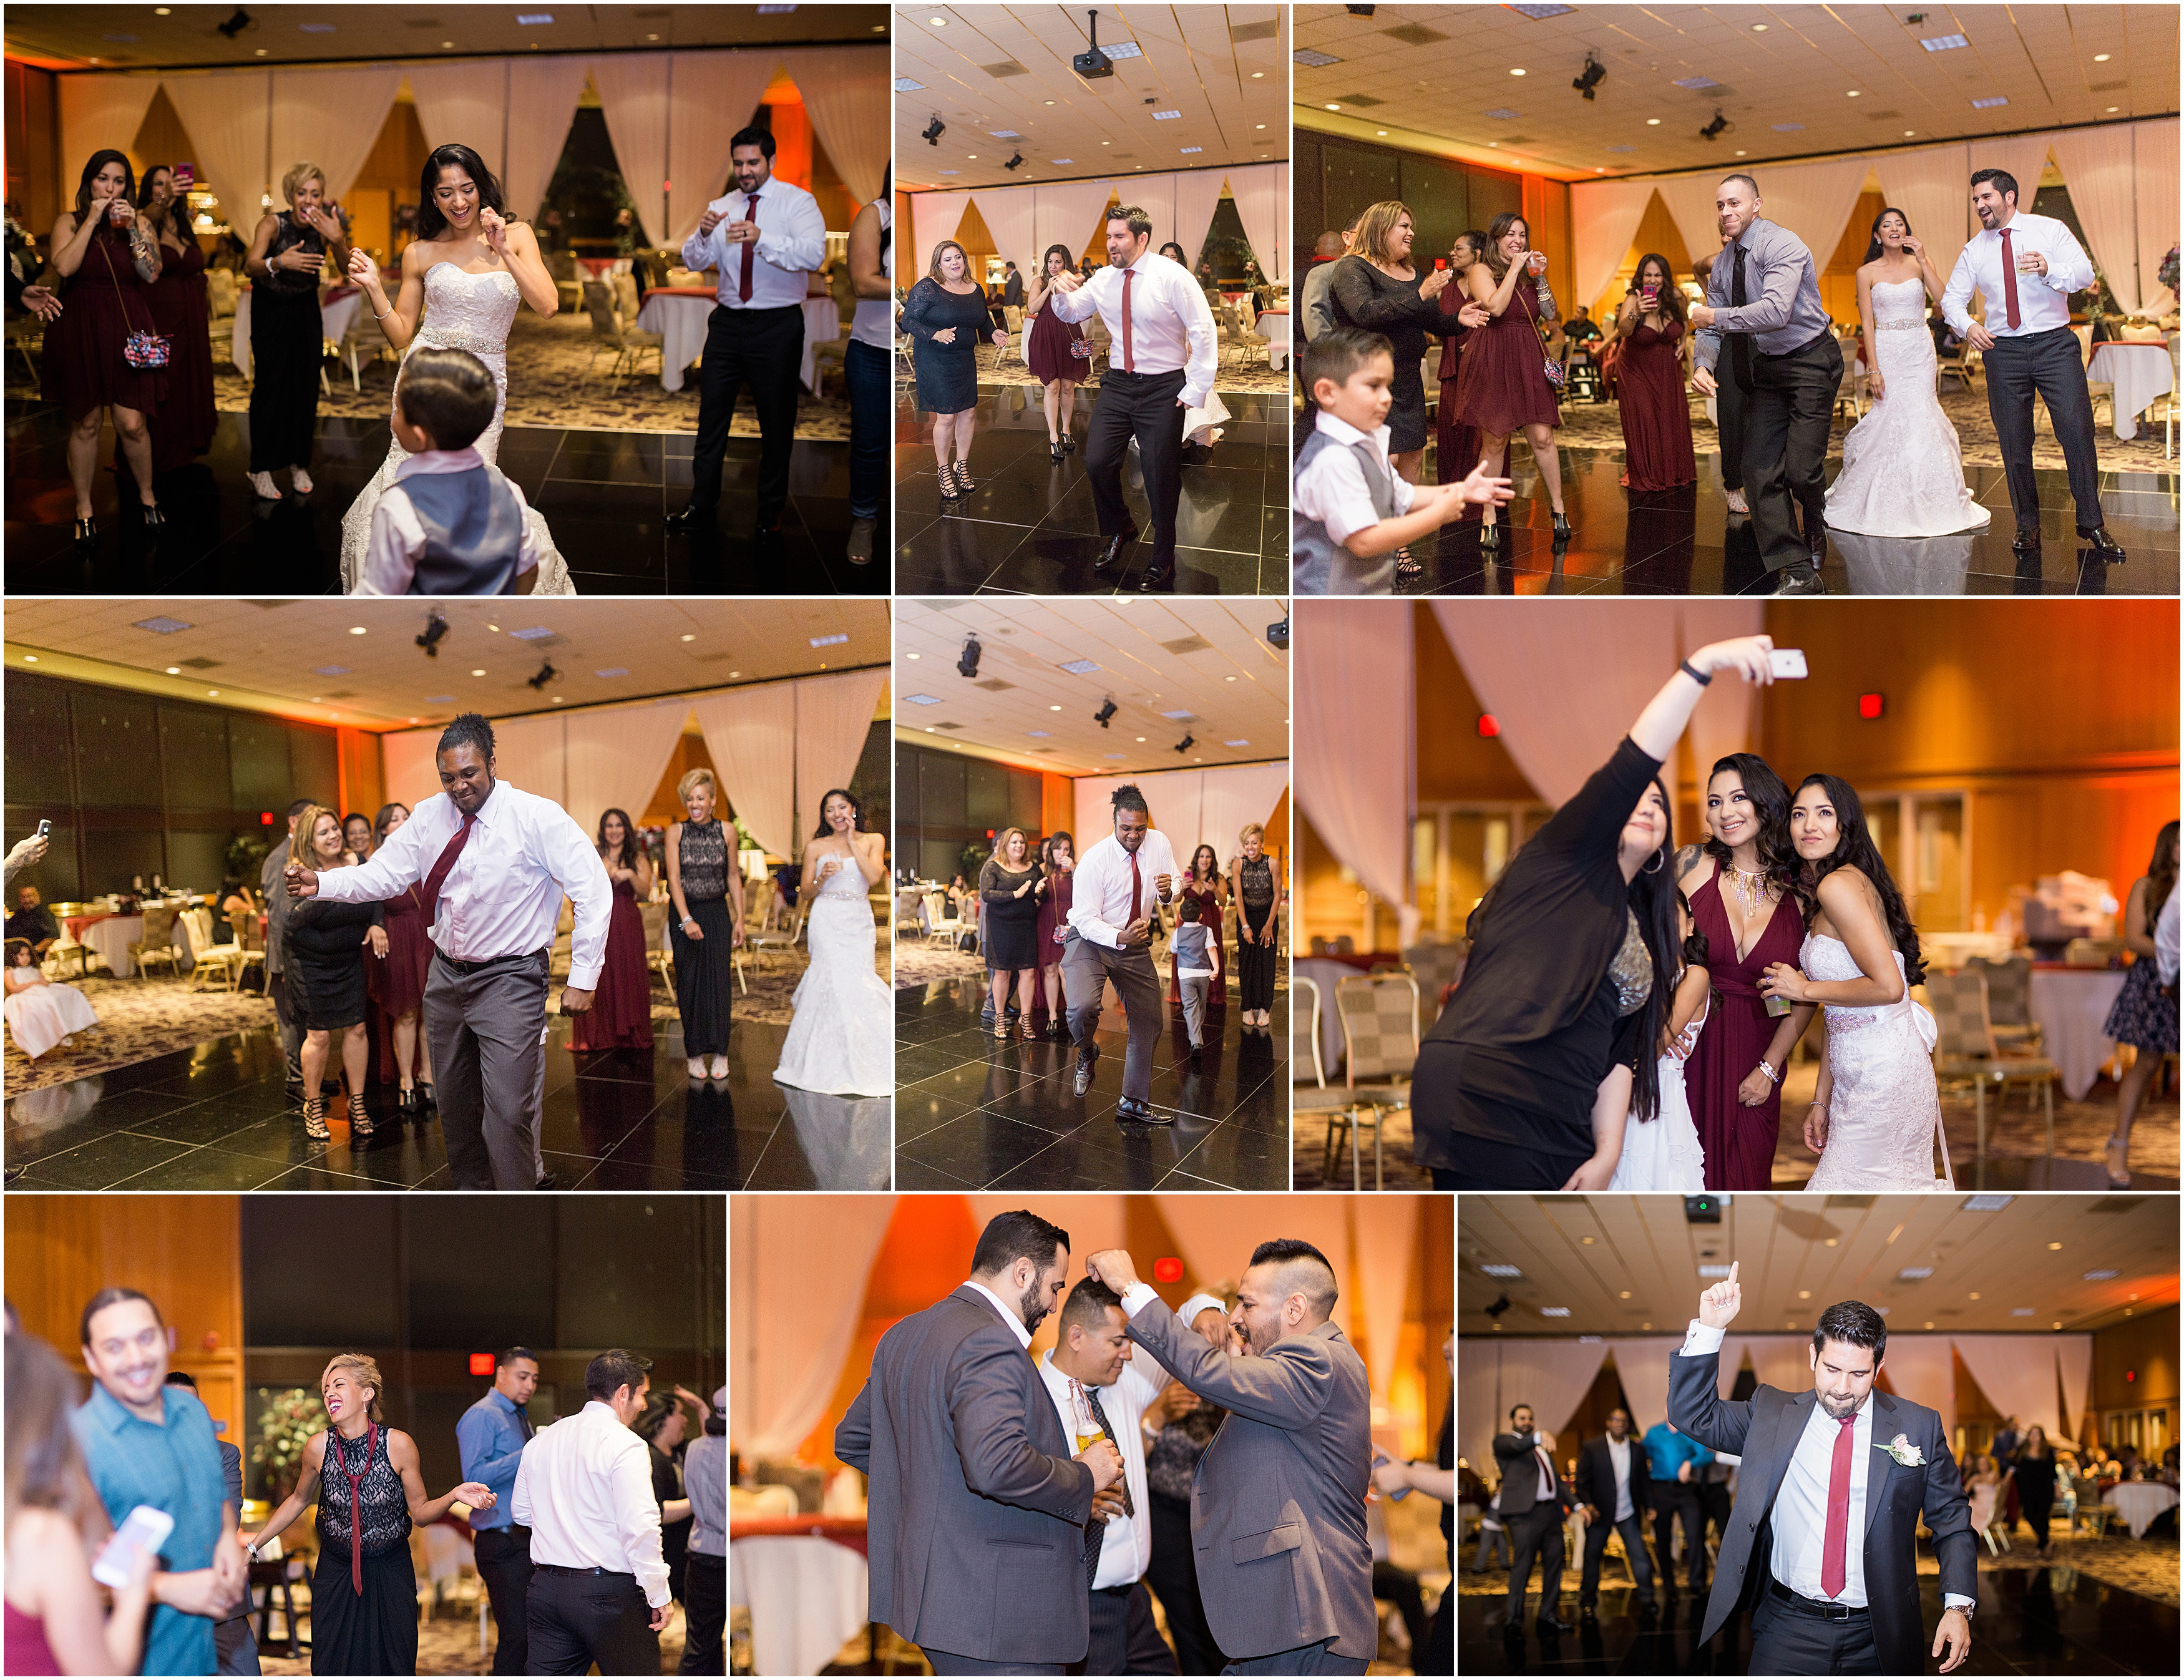 dance party at lakewood centre wedding